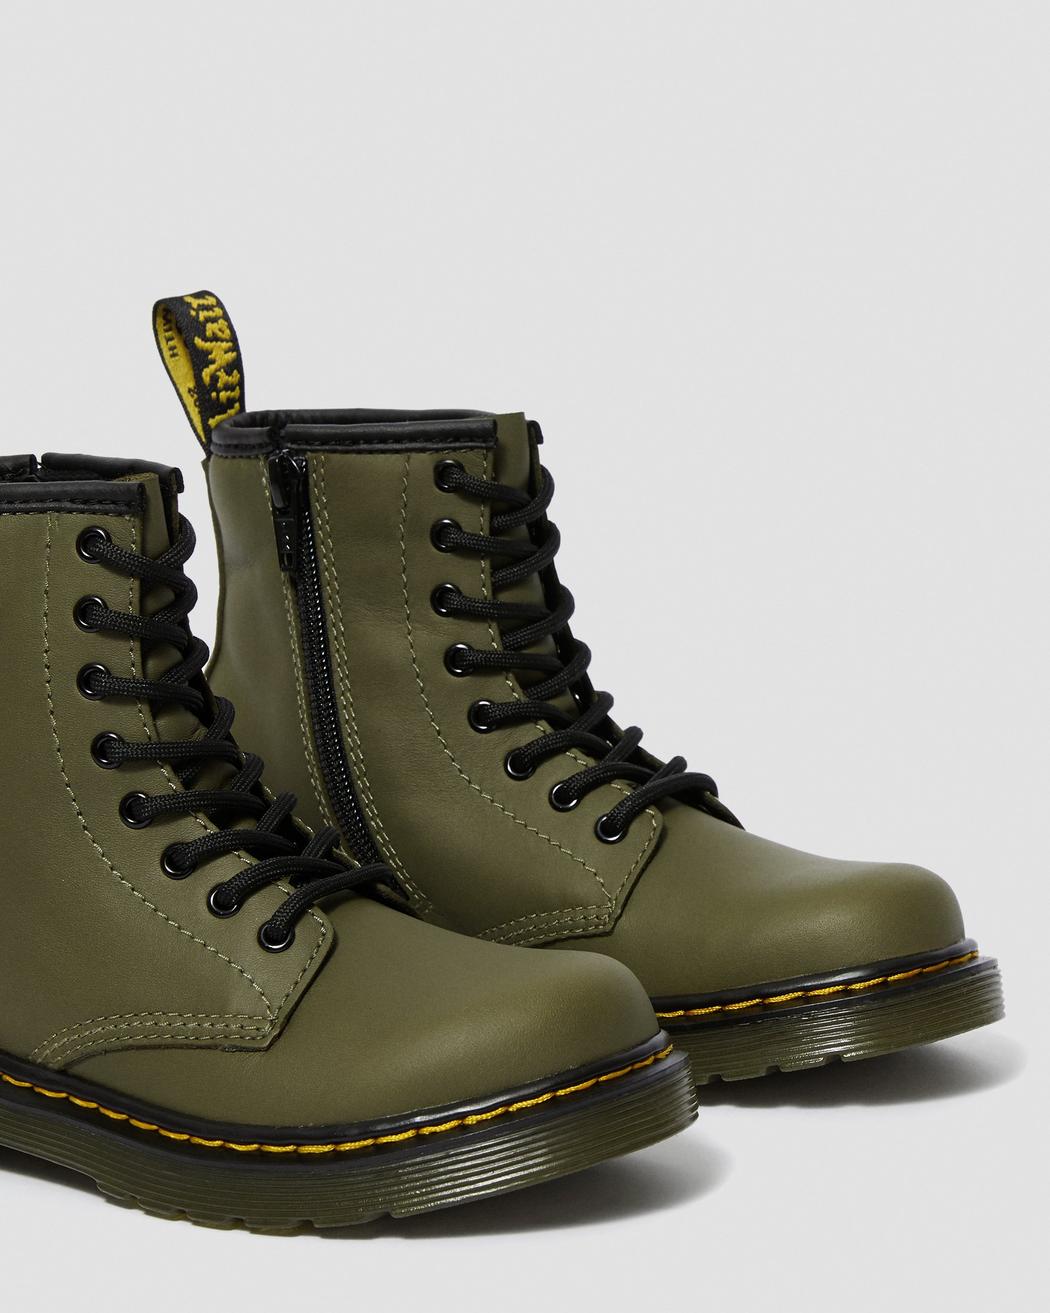 Junior 1460 Leather Lace Up Boots | Dr. Martens